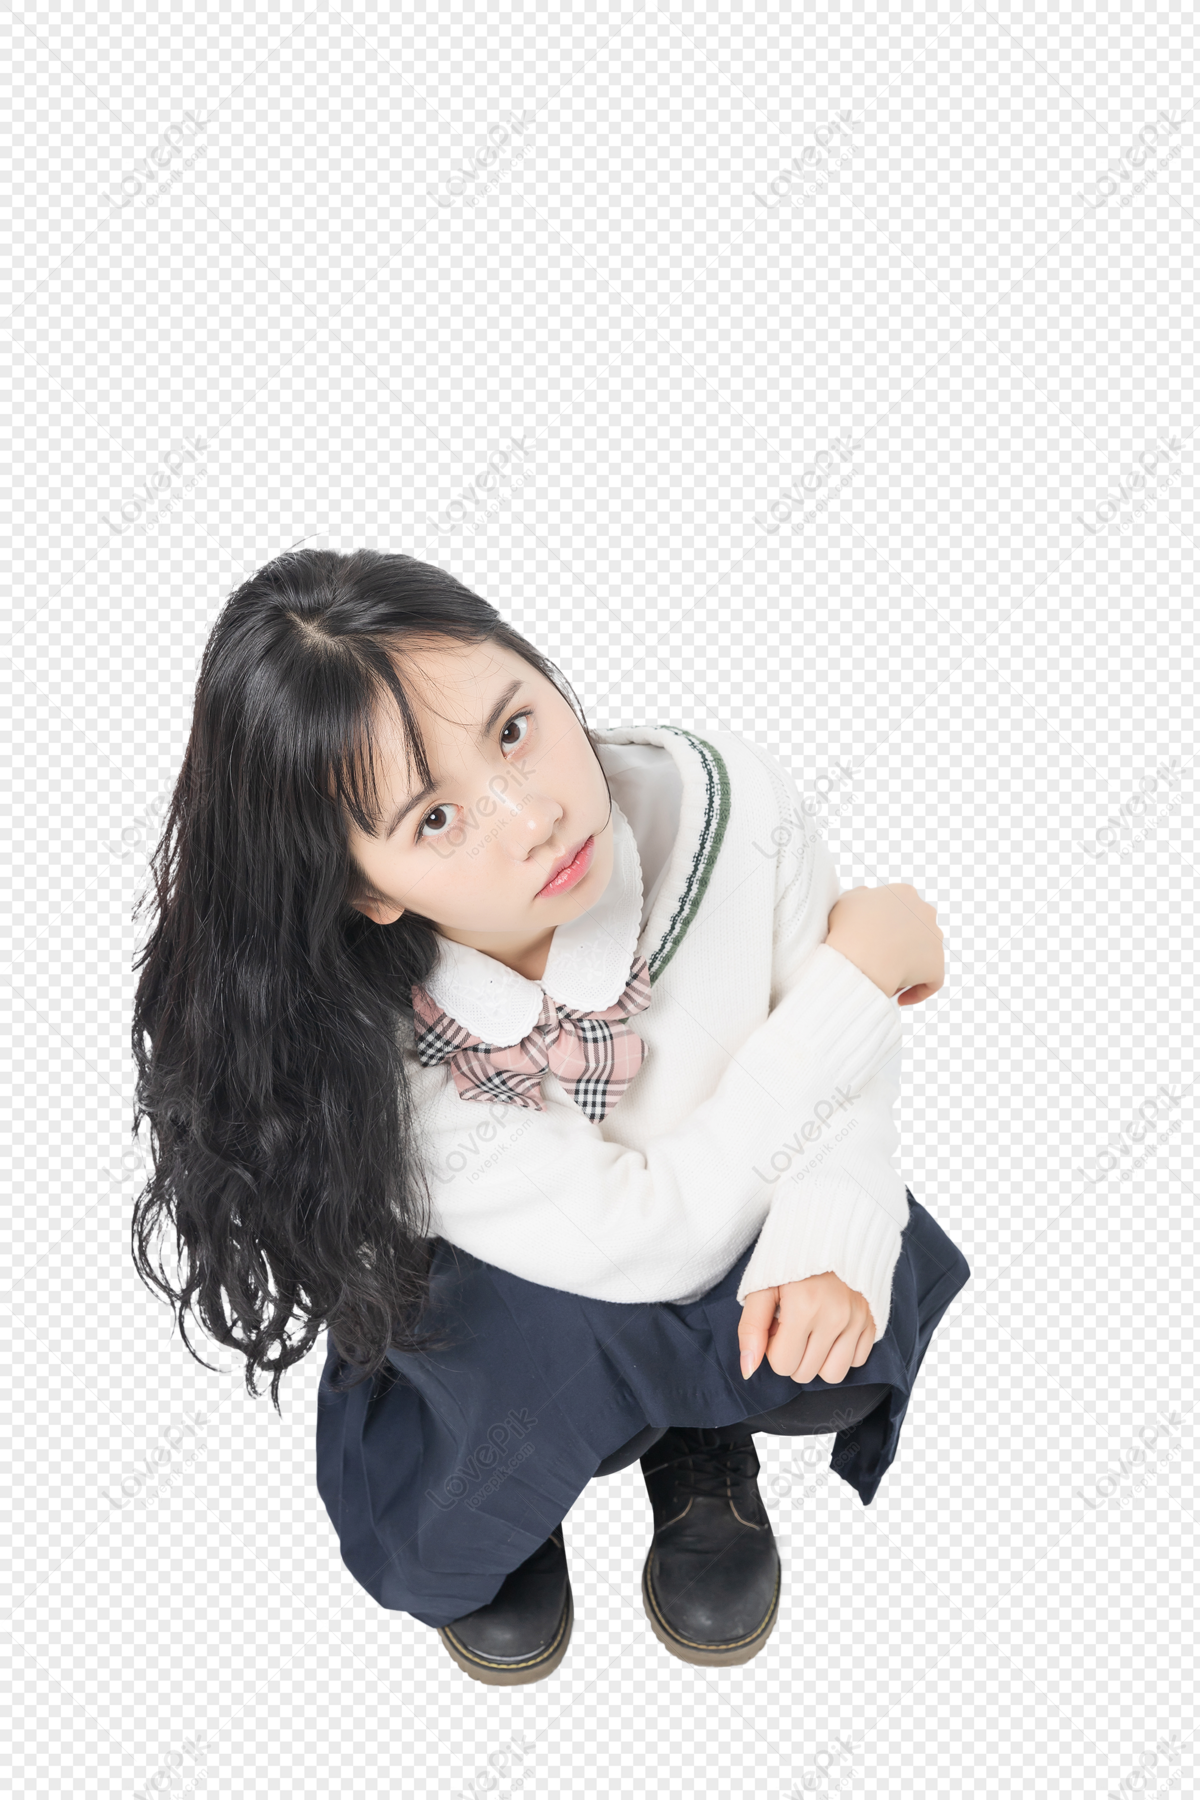 A Melancholy Adolescent Girl PNG Image Free Download And Clipart Image ...